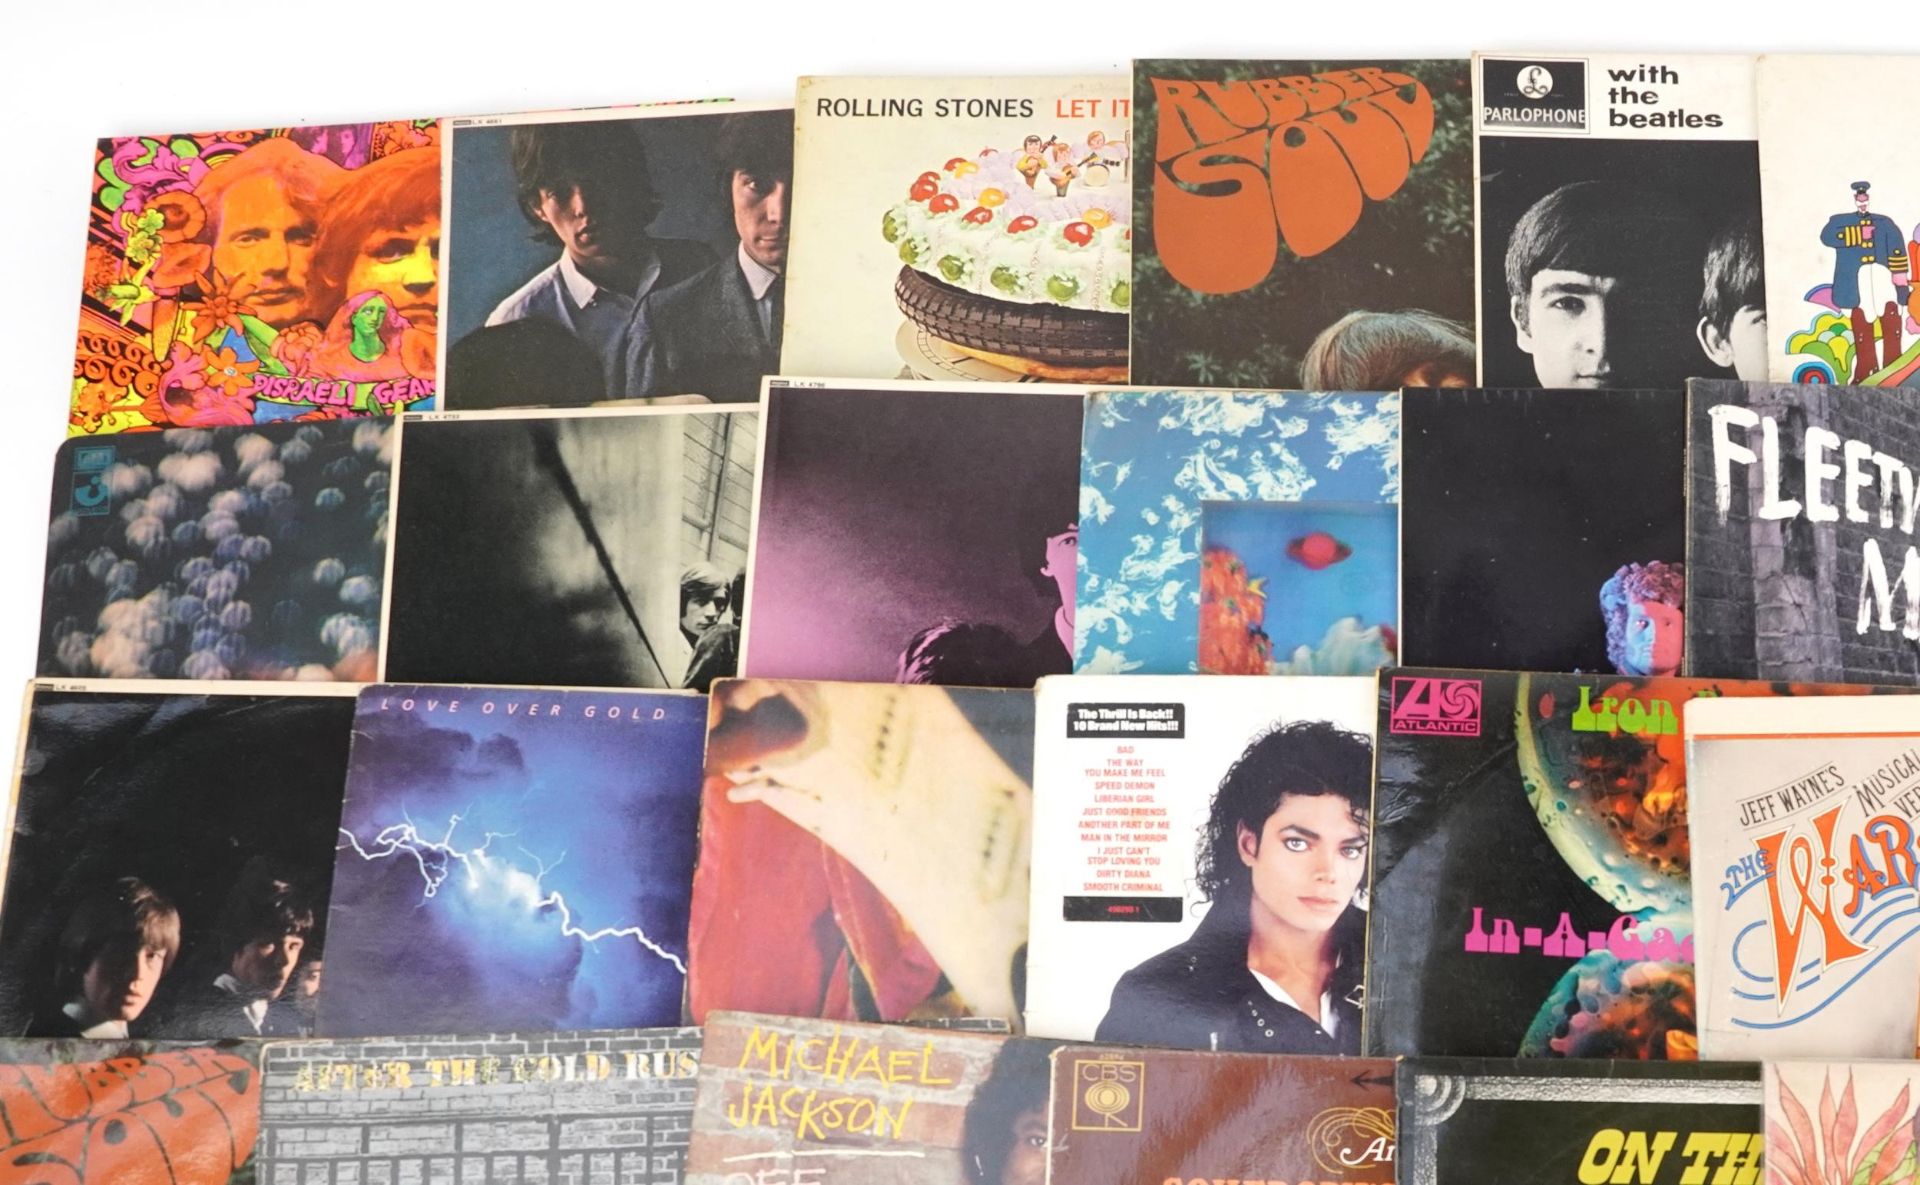 Vinyl LP records including Cream, The Rolling Stones, The Beatles, Love, David Bowie, Dire Straits - Image 2 of 5